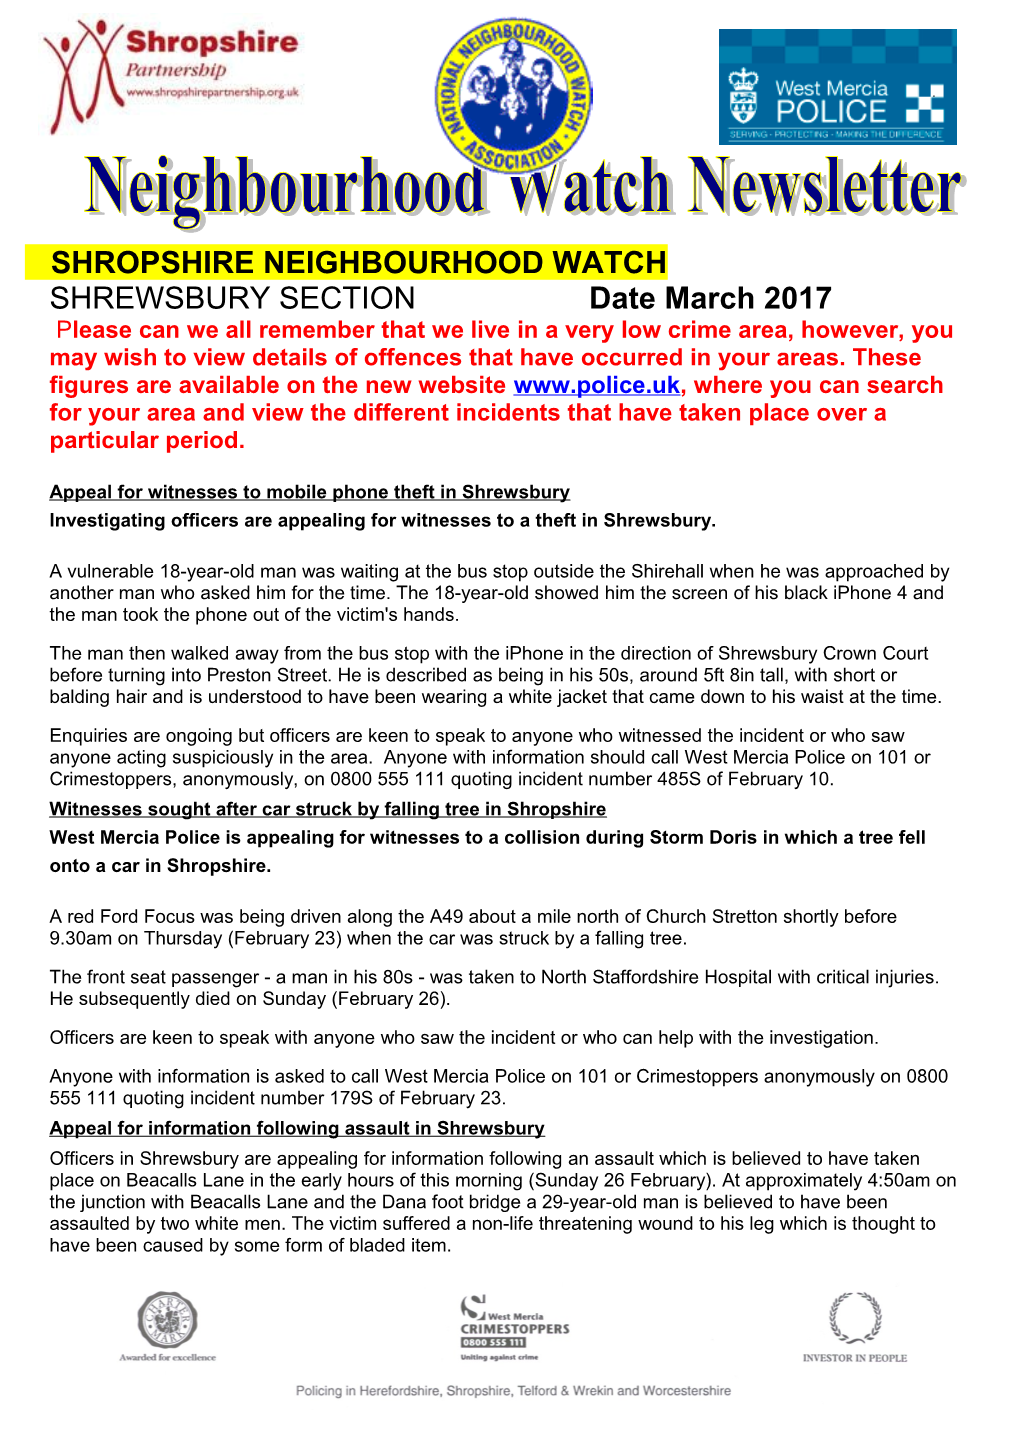 From Shelly Sidwell, Shropshire Division Neighbourhood Watch Clerk